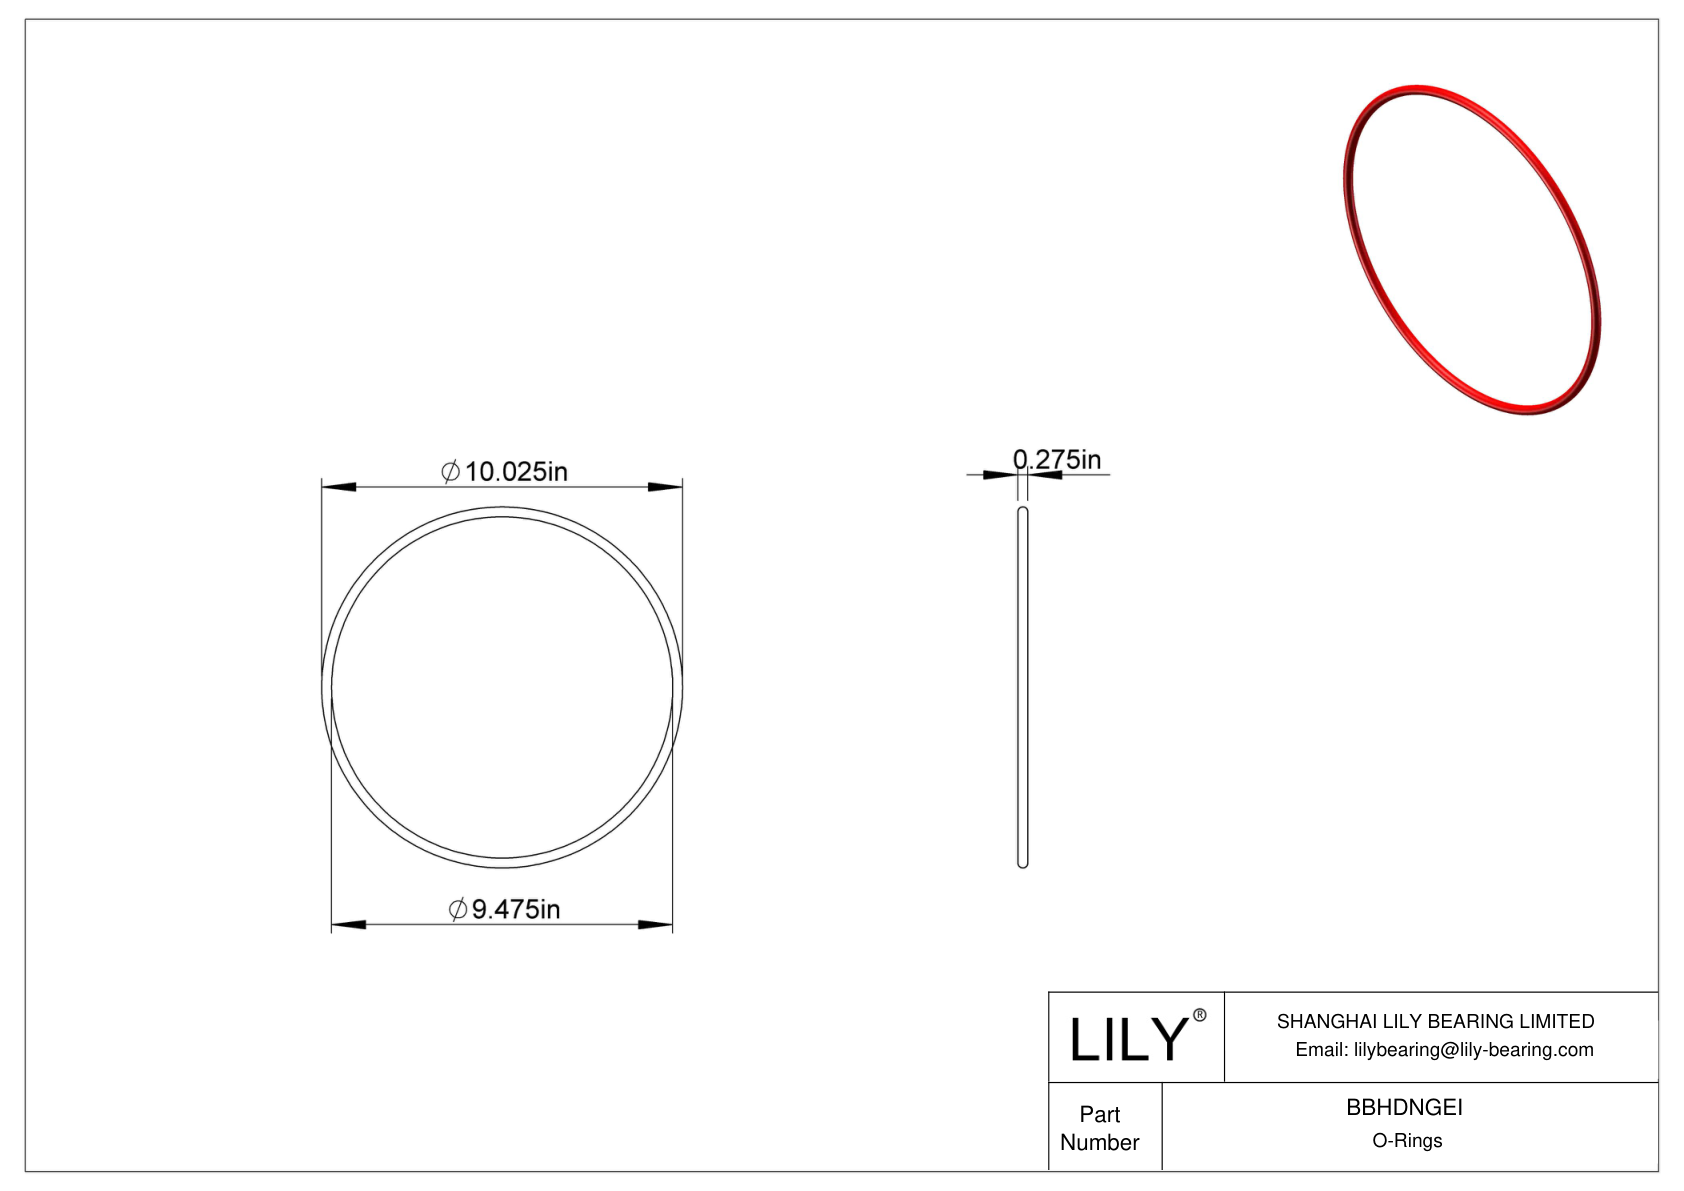 BBHDNGEI High Temperature O-Rings Round cad drawing